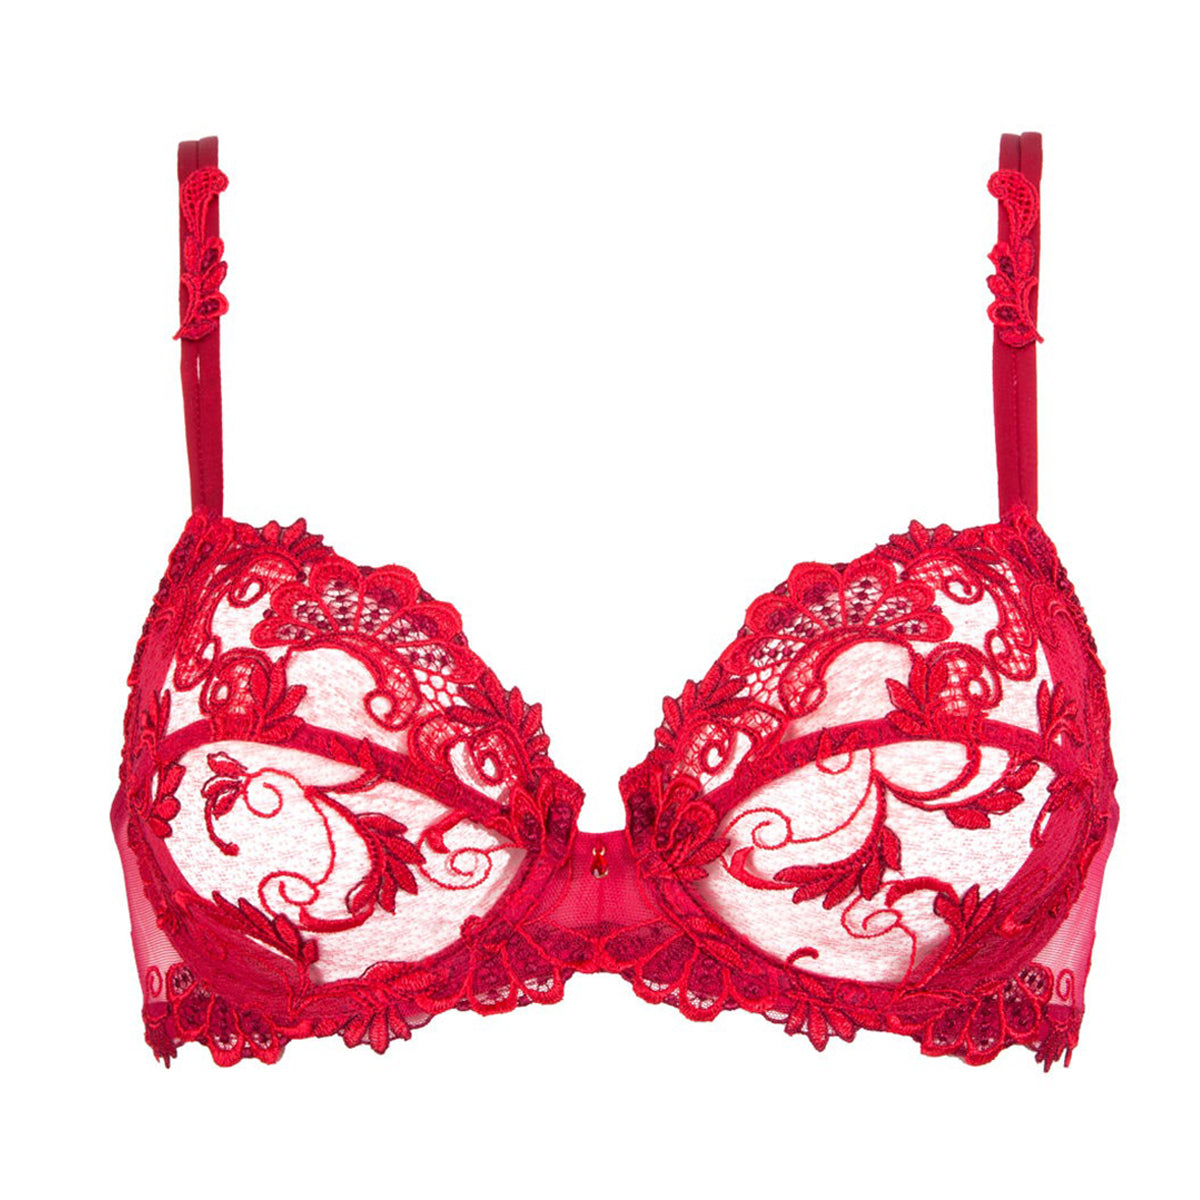 Red J Cup Bras